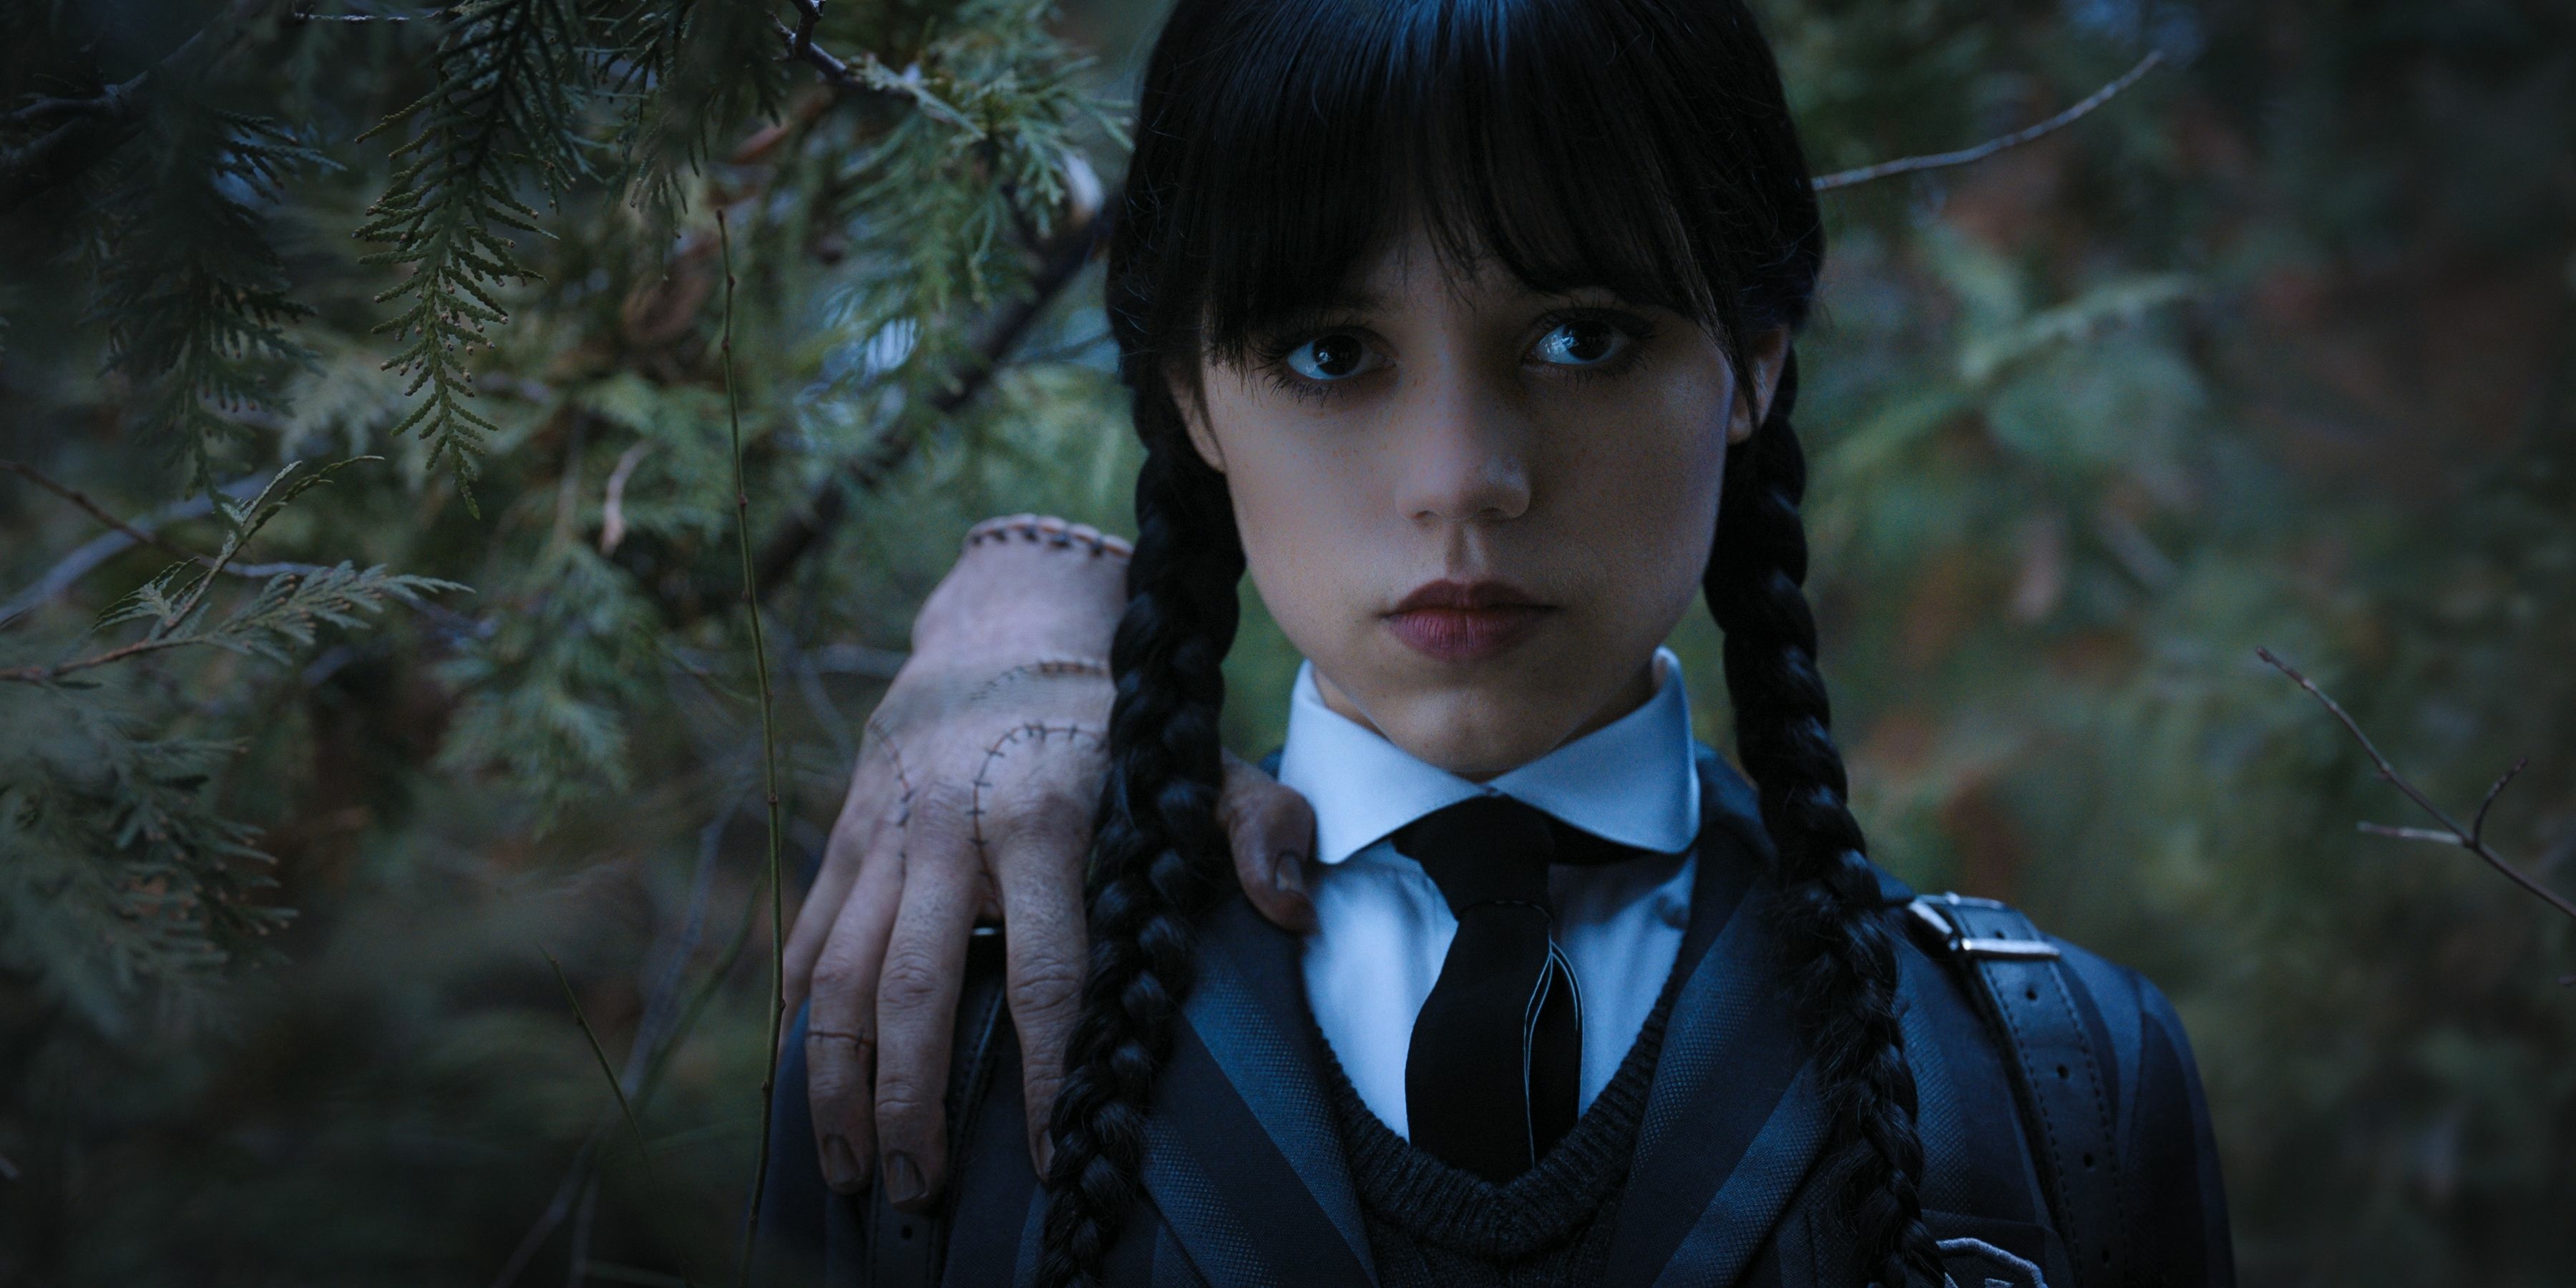 Anime girl character from Wednesday In The Addams Family series 2K wallpaper  download